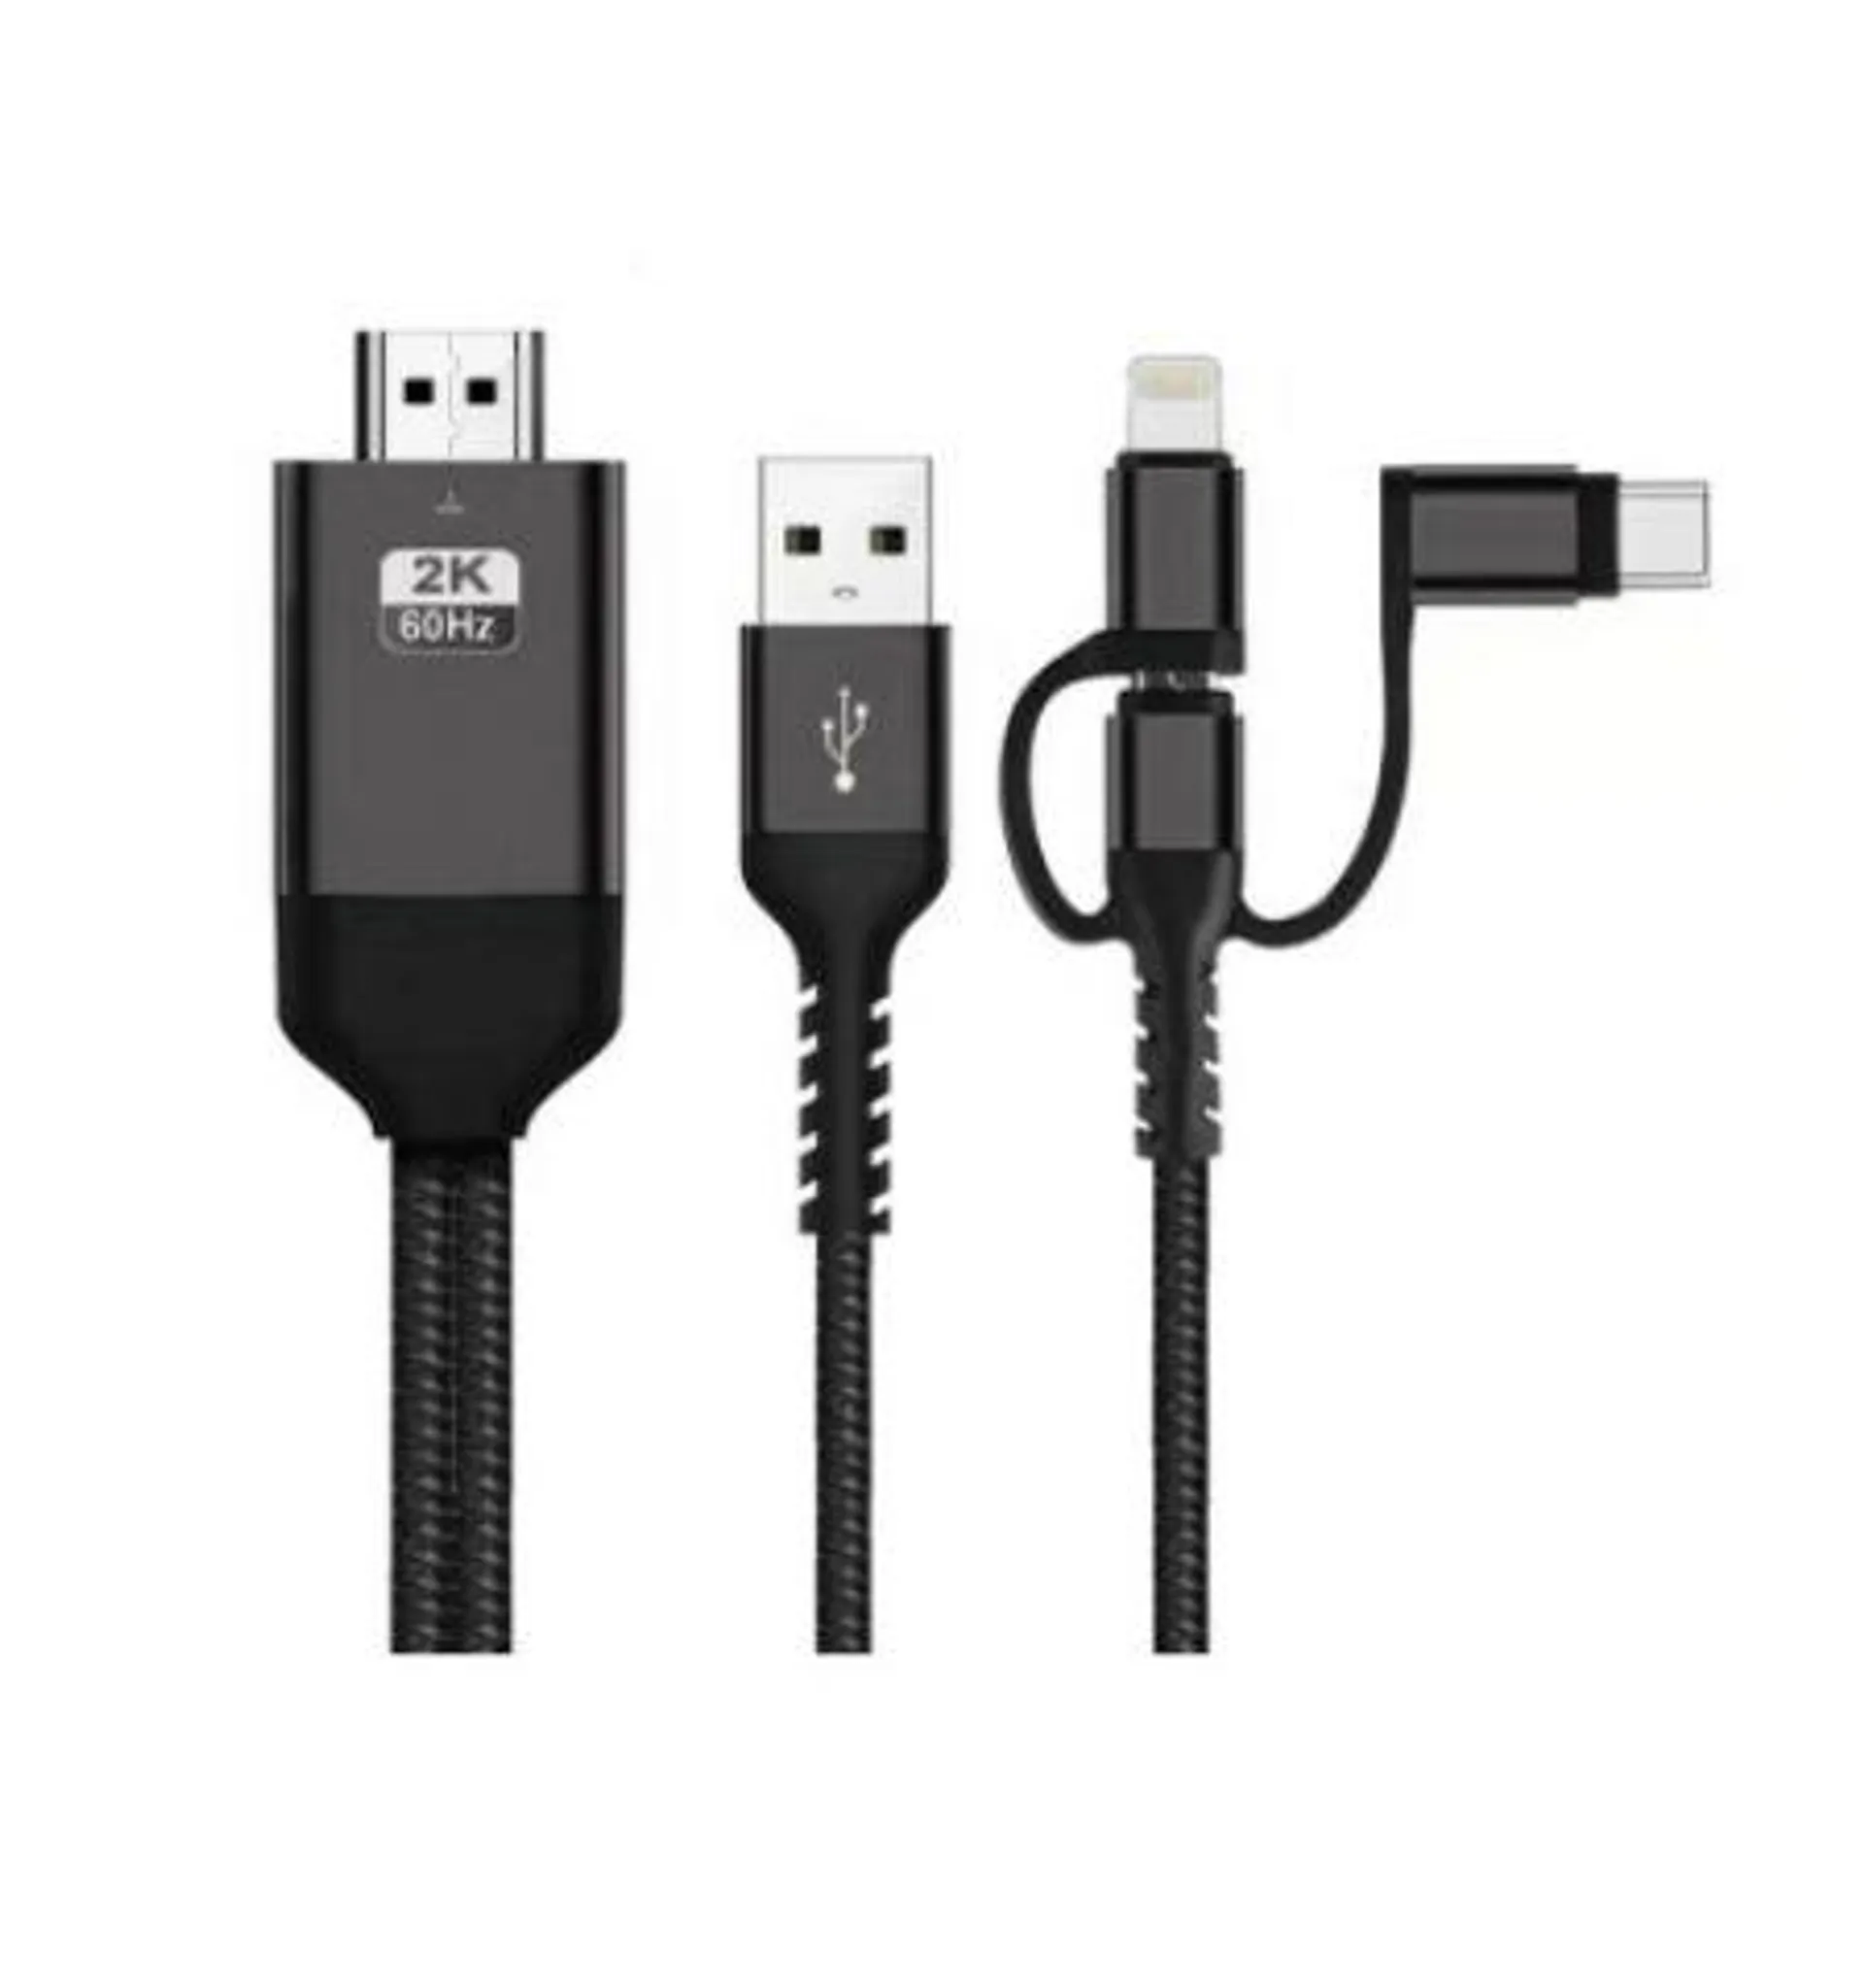 3-in-1 Phone to HDTV Cable